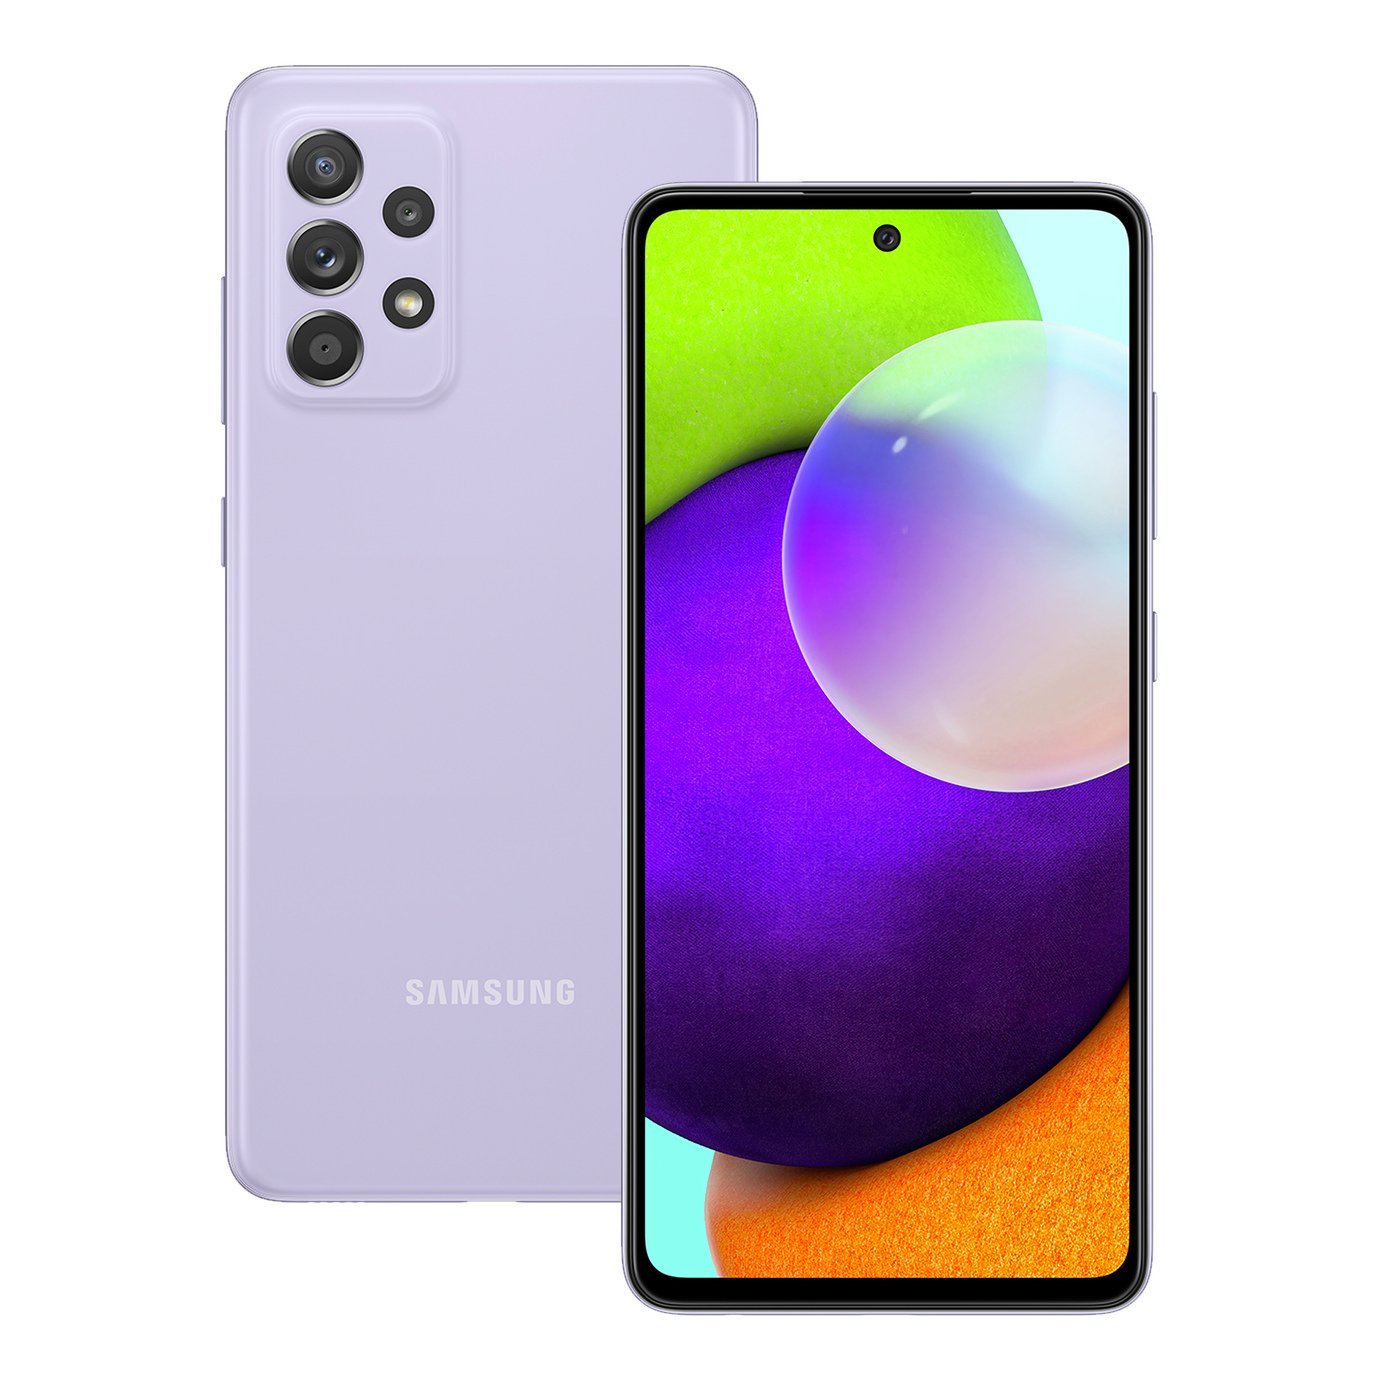 Samsung Galaxy A52 and Galaxy A52 5G European prices leaked with a price  cut compared to the Galaxy A51 - NotebookCheck.net News